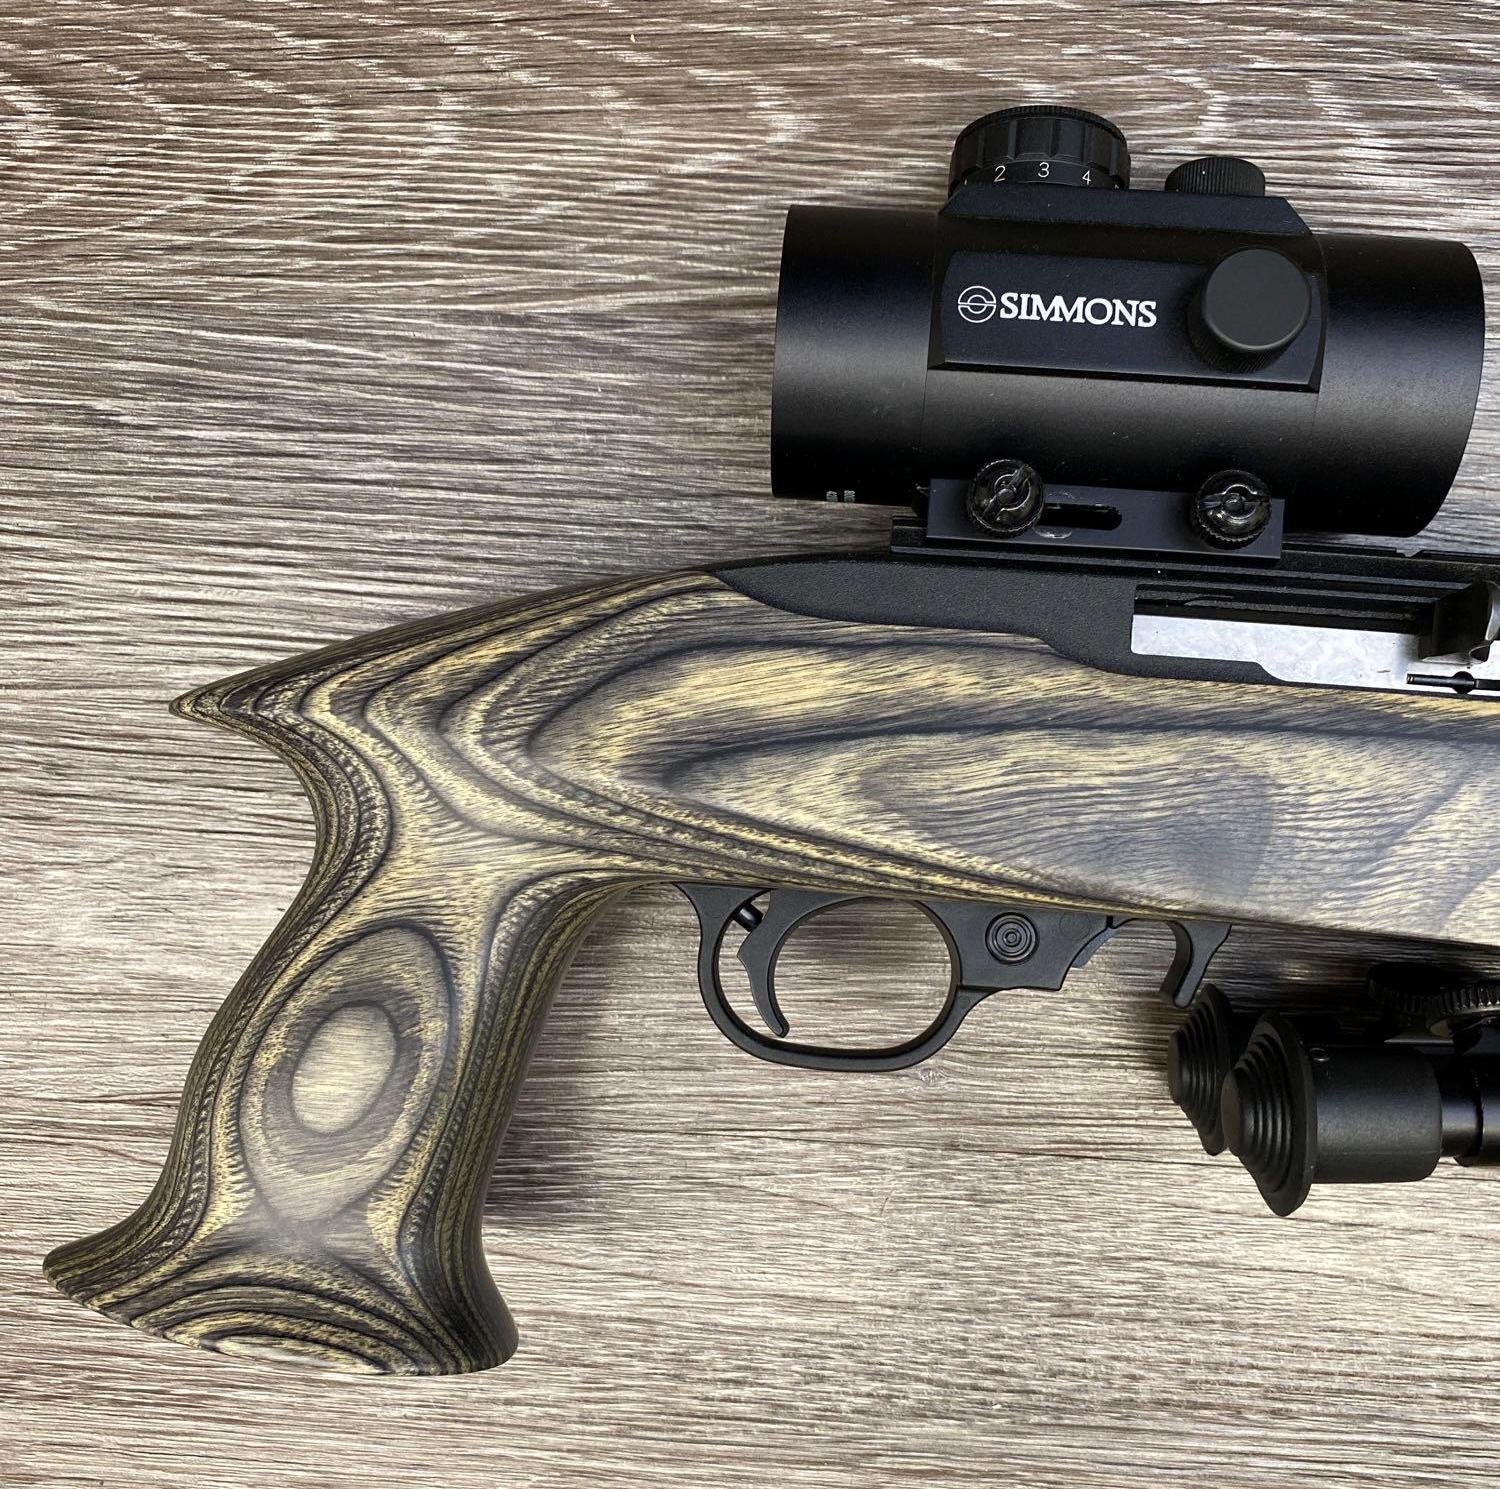 OUT OF STATE ONLY CUSTOM RUGER CHARGER SEMI-AUTO PISTOL .22 LR w/BIPOD & HOLOGRAPHIC SIGHT